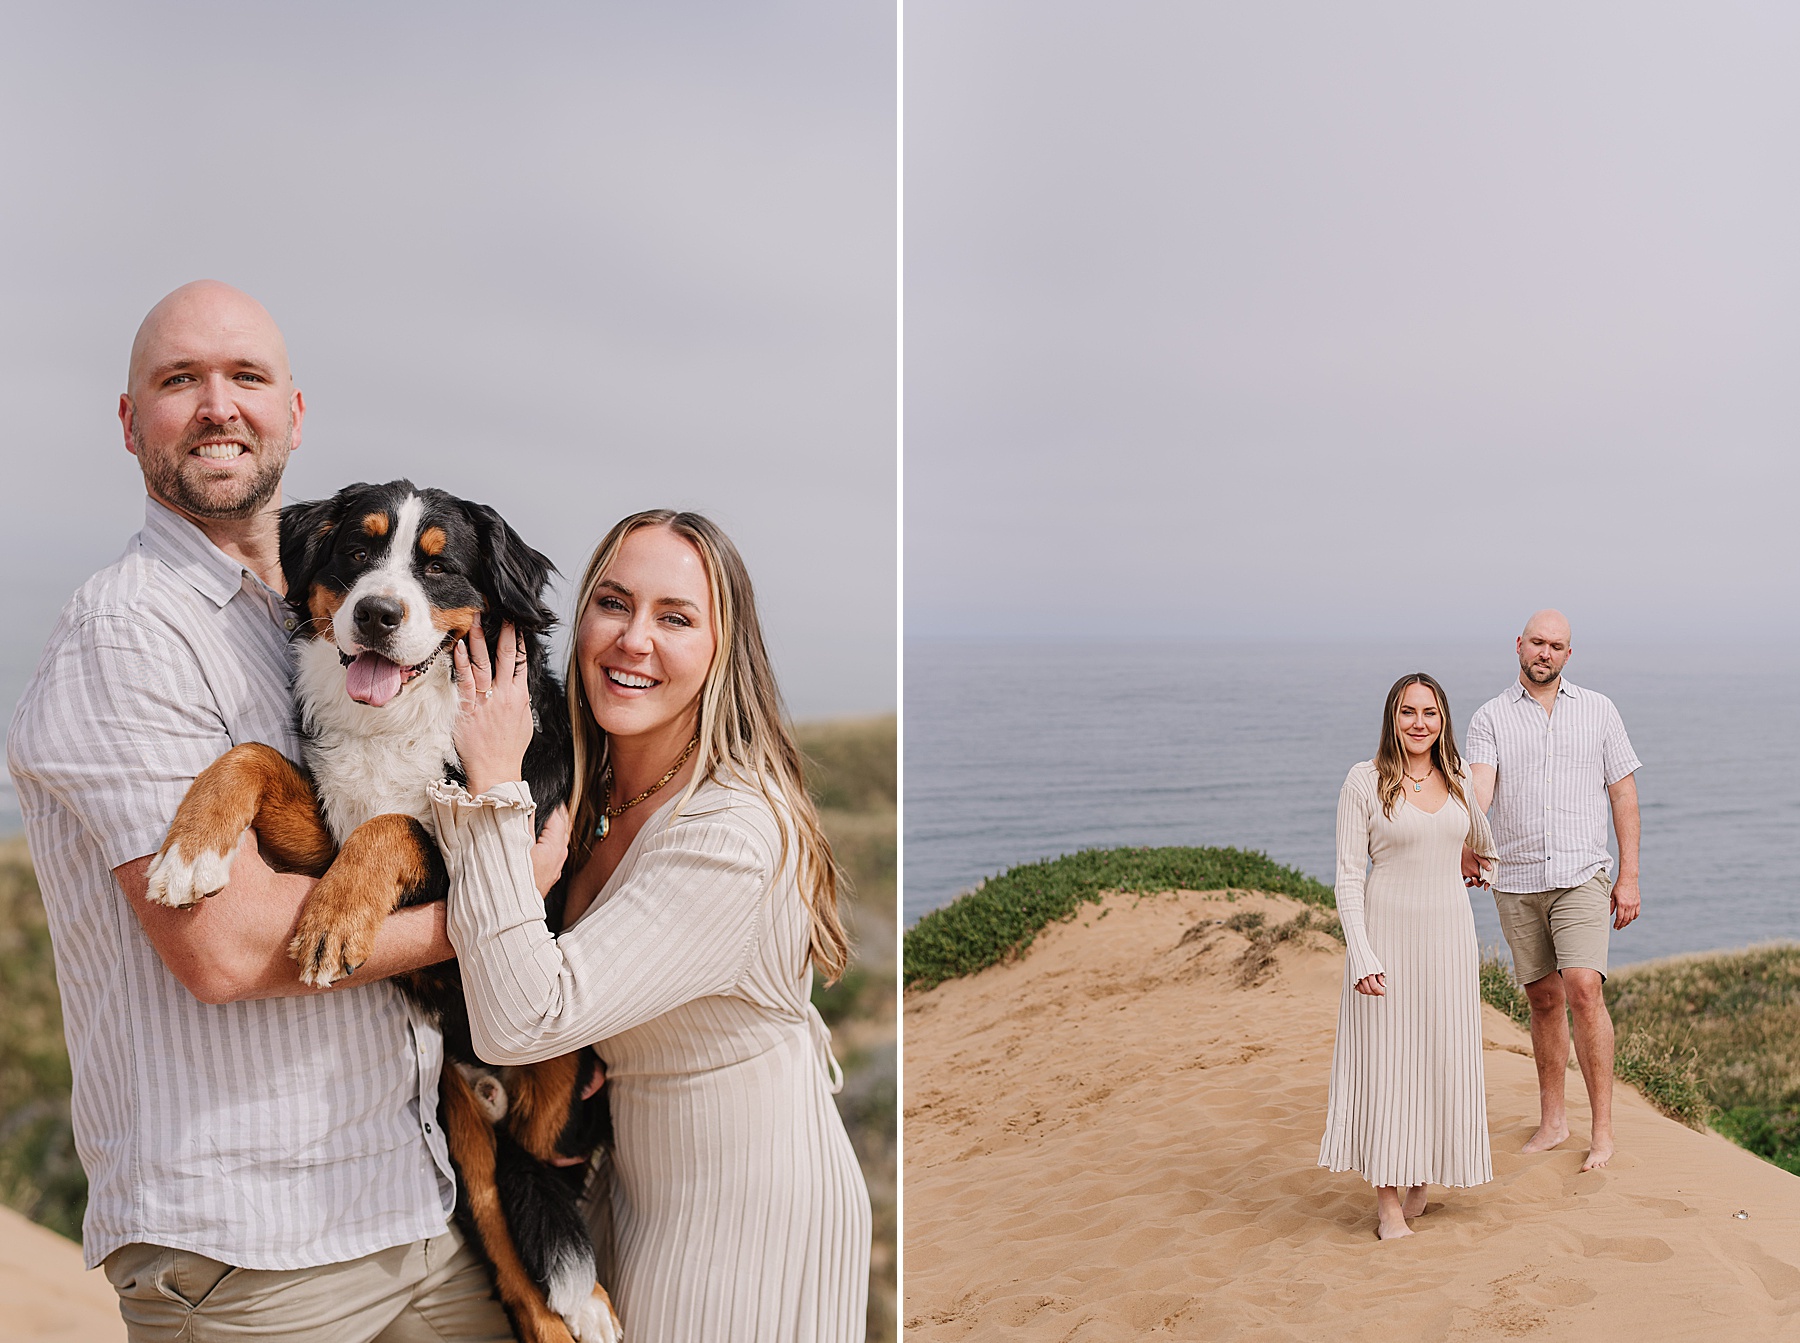 Nikkels Photography, as SLO-based wedding photographer, shares inspiration for a Montana De Oro Surprise Proposal.